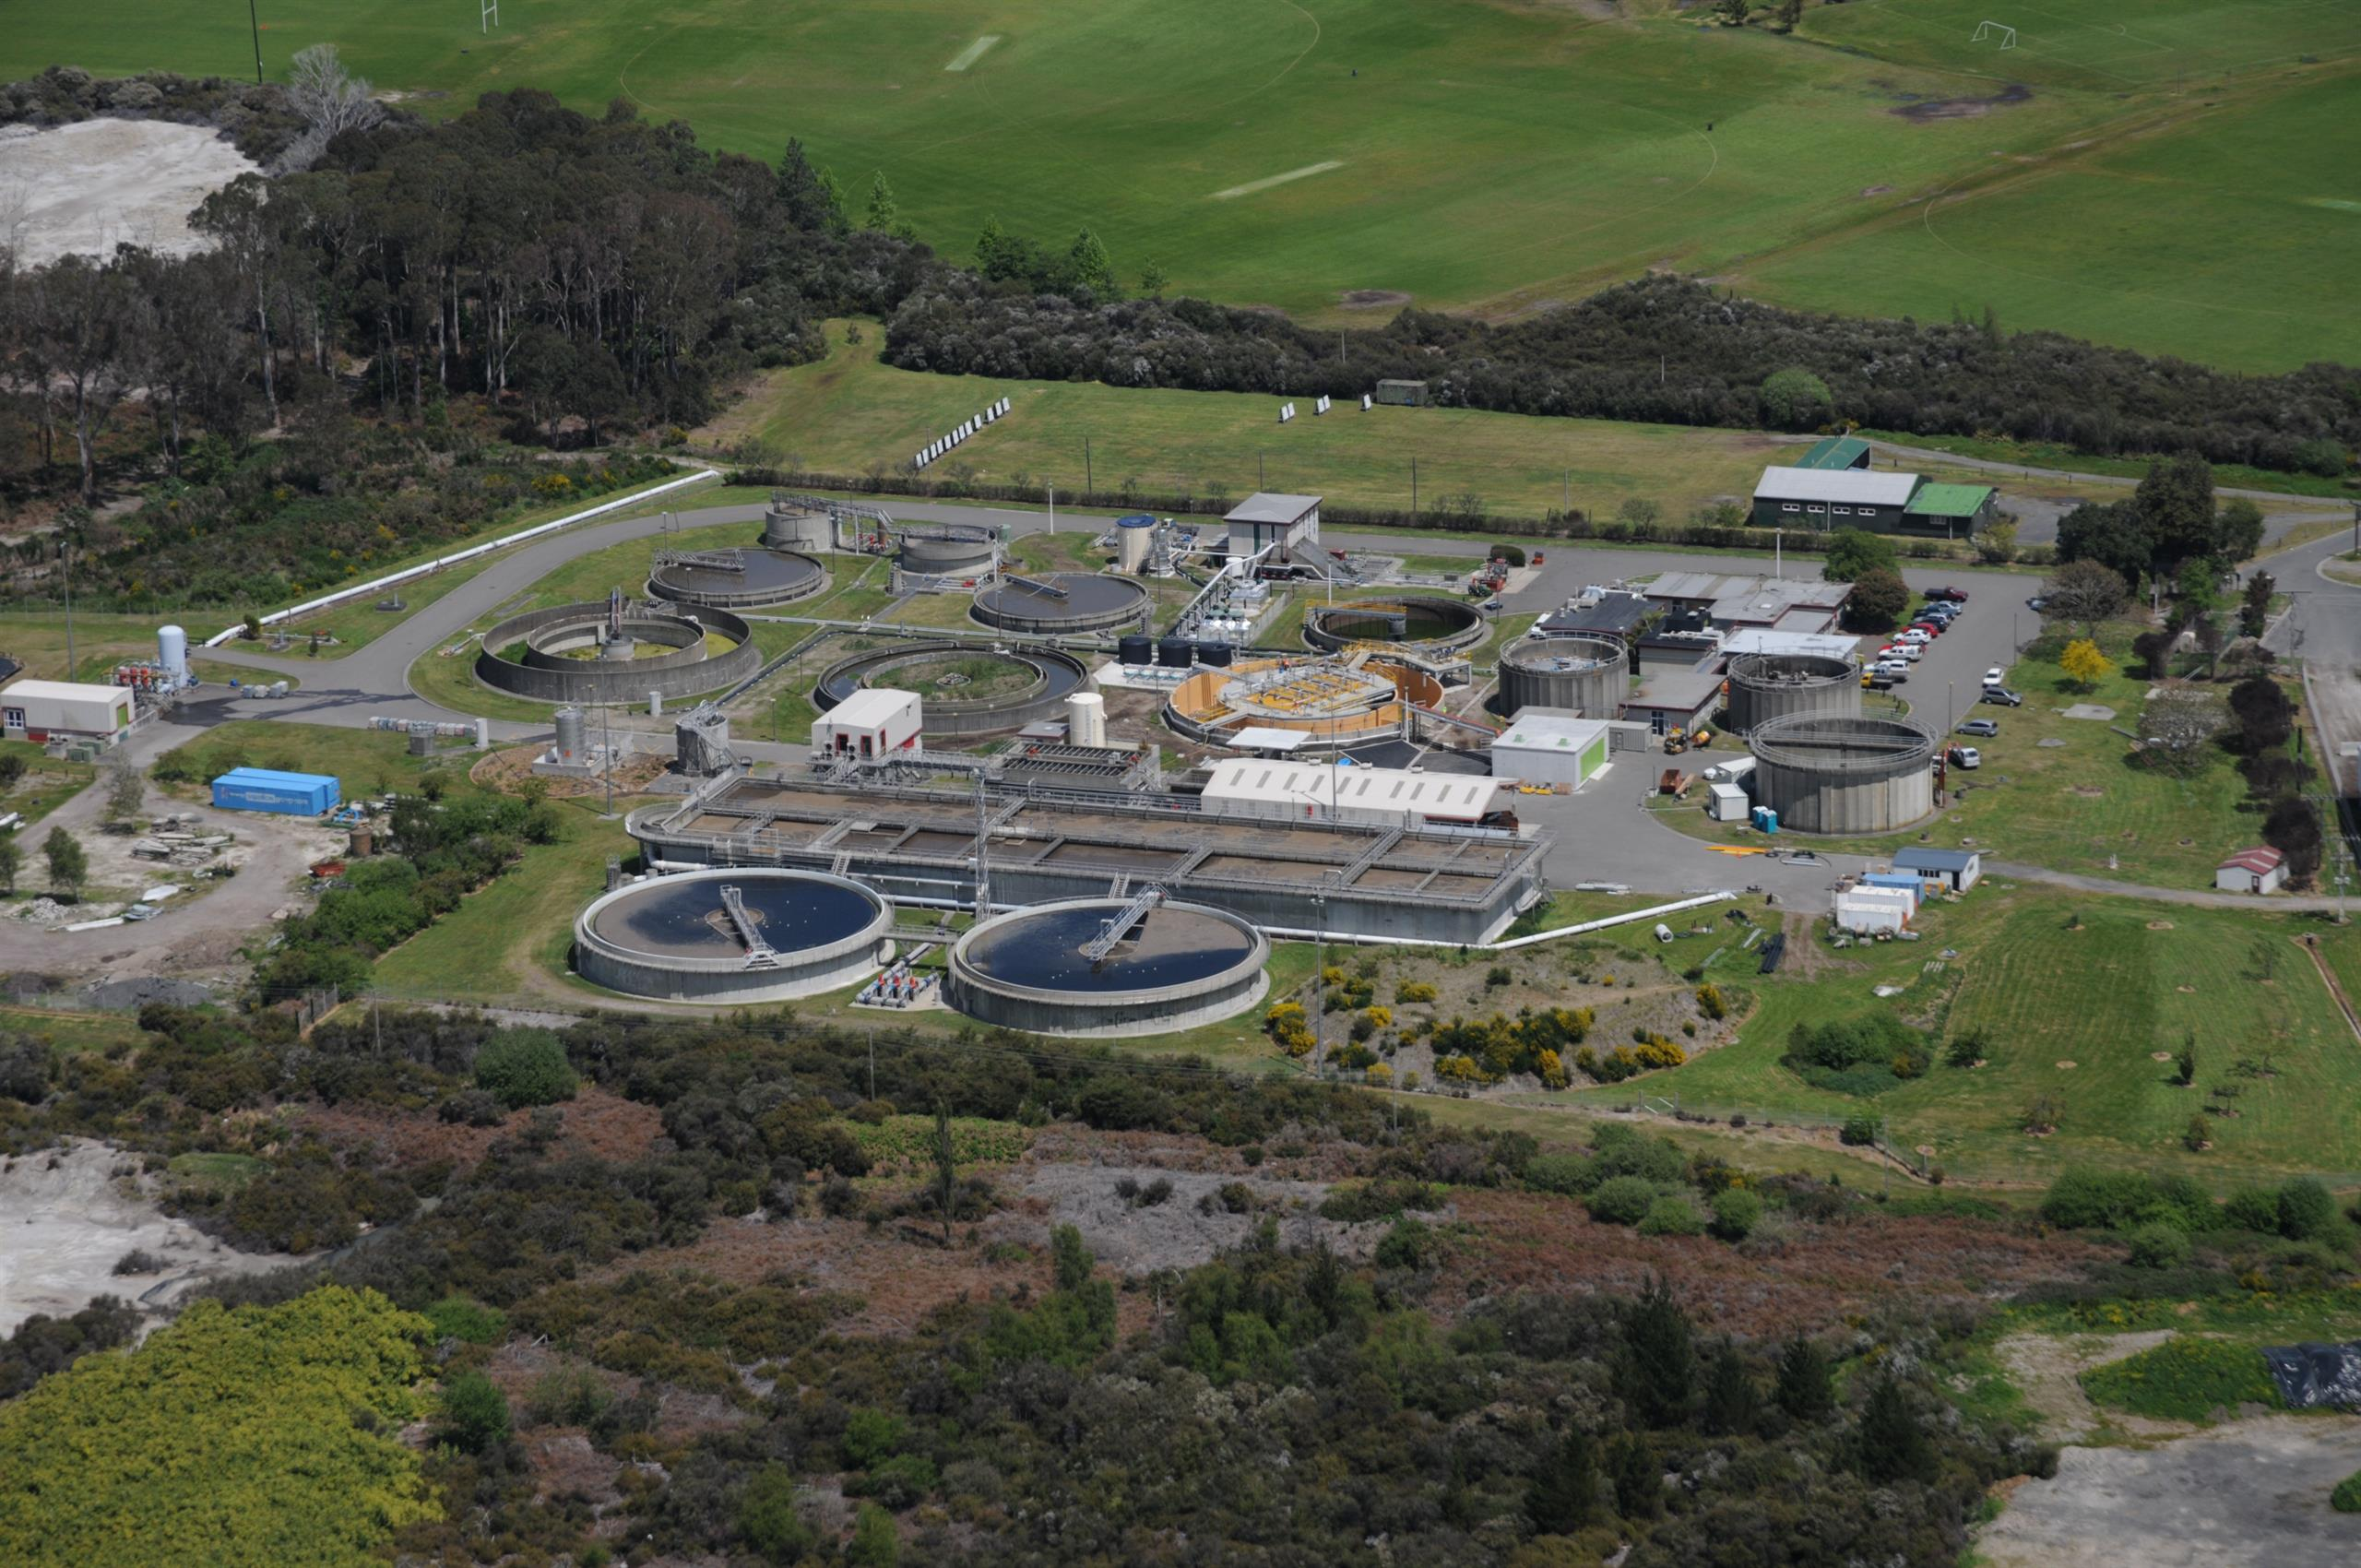 Commissioning Rotorua’s membrane bioreactor plant – providing probably the best quality wastewater discharged in New Zealand – was the result of three years collaborative work between Rotorua District Council and our water specialists AWT to optimise the 